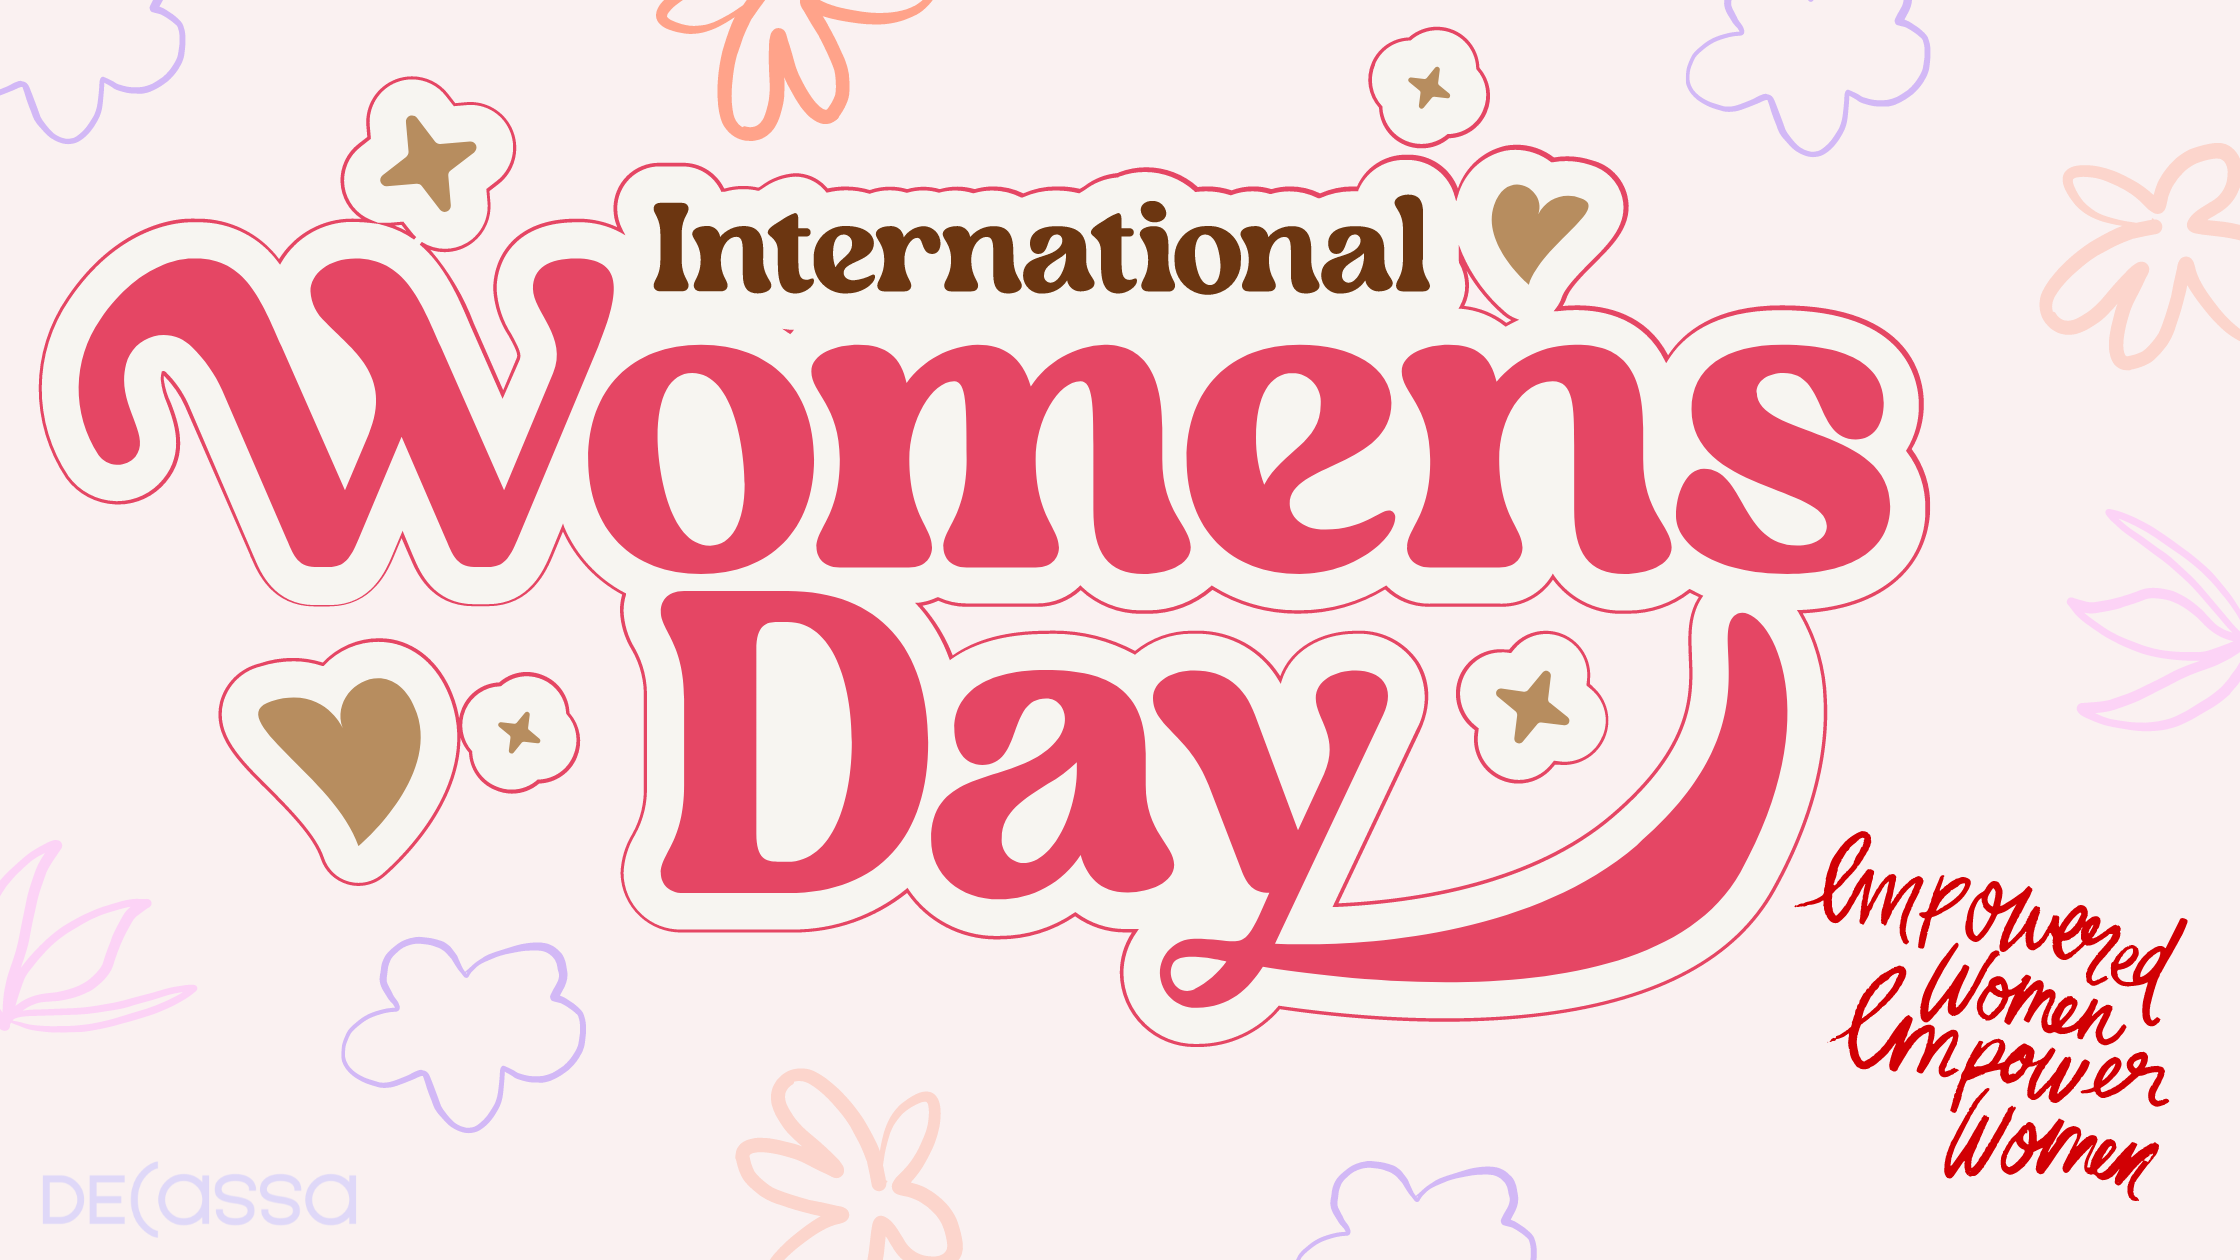 A sign with Internationals Women's day  with soft pink and purple accents surrounding it. 